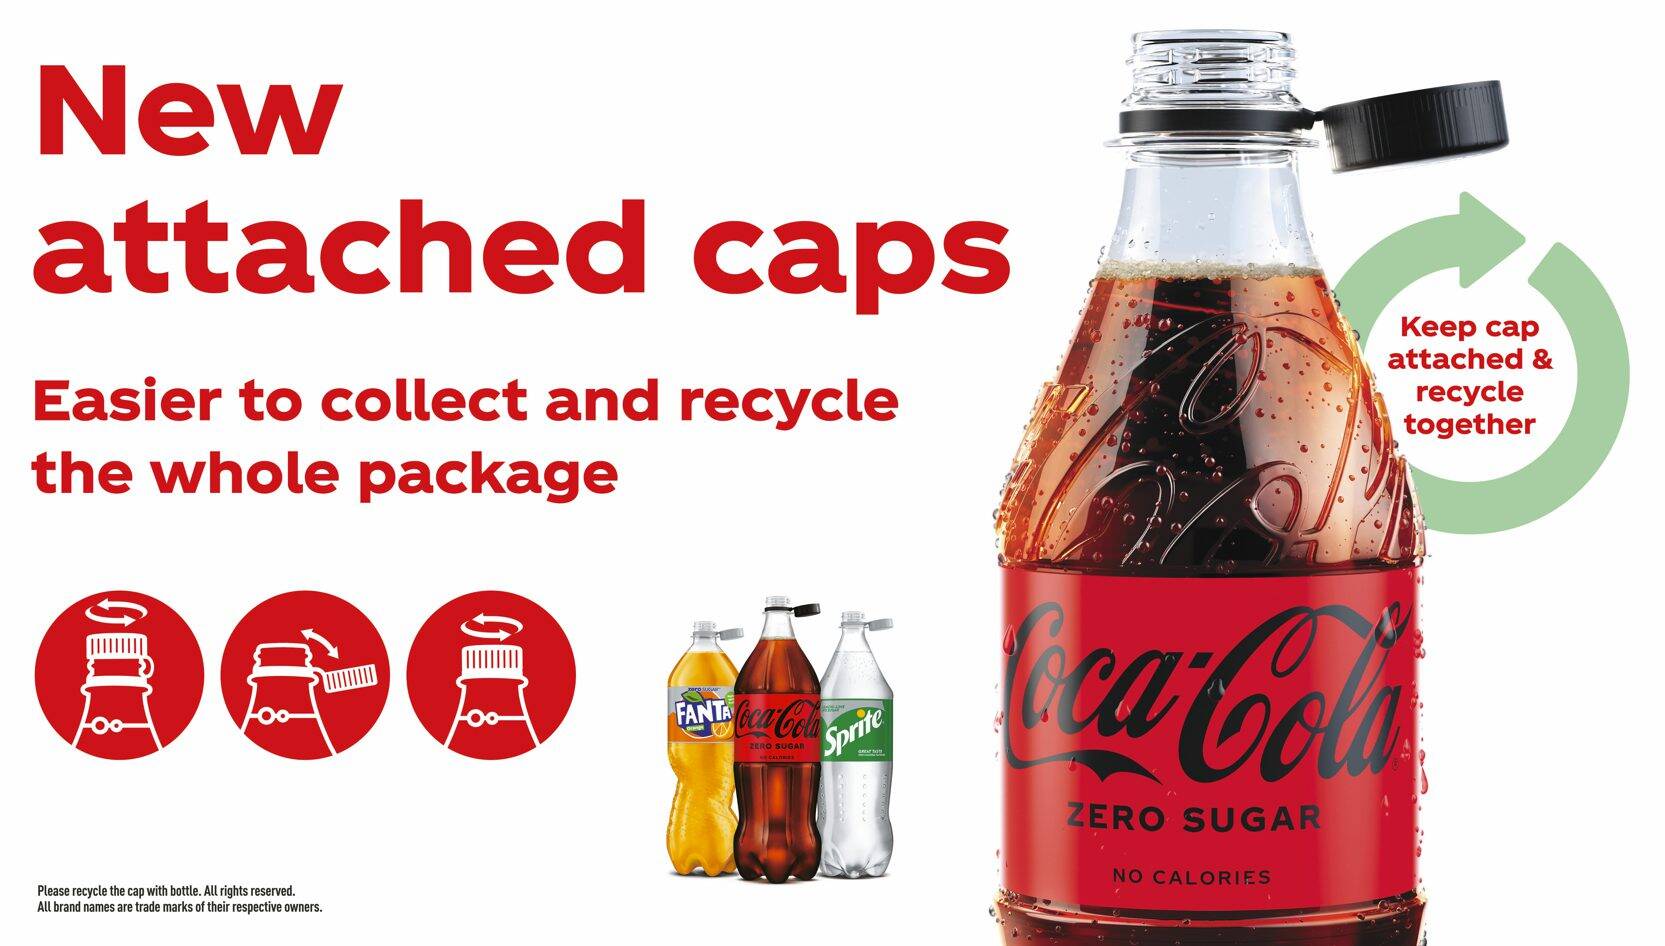 Beverage giants’ pledge to recycle every plastic bottle they produce slammed as ‘cowardly’